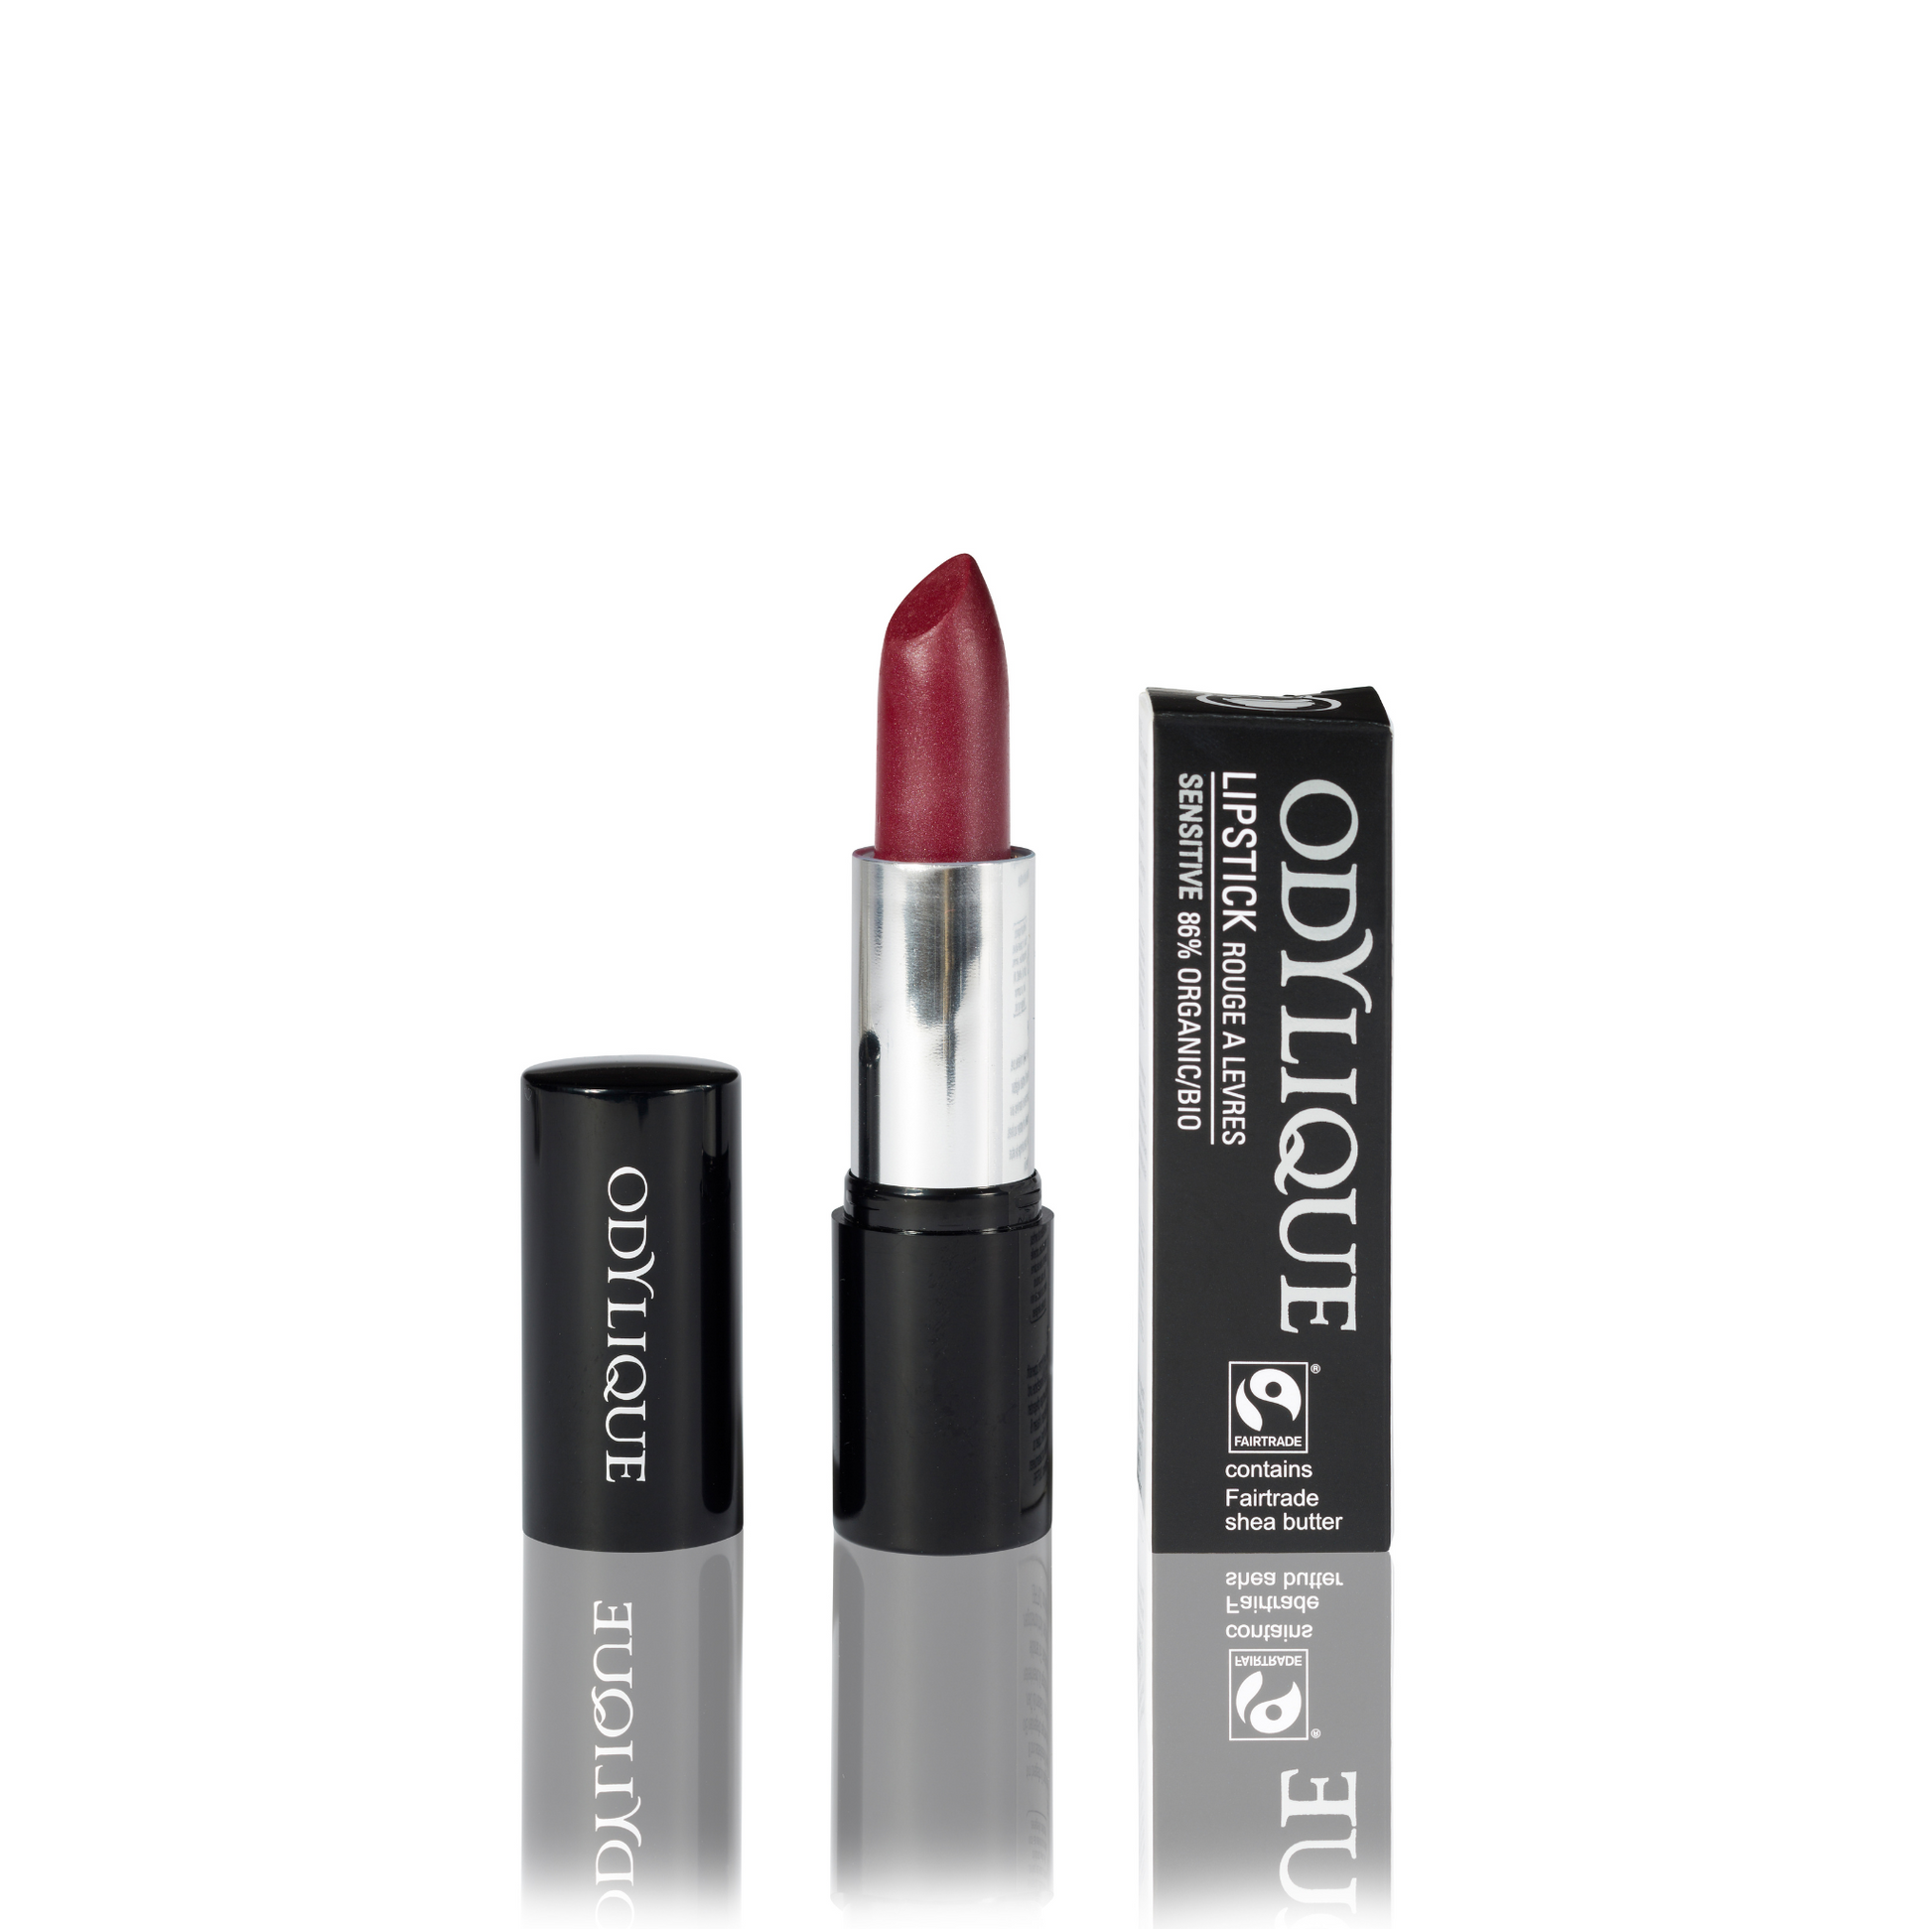 Odylique lipstick in Raspberry Coulis (juicy, sheer raspberry red) partially twisted up from its black tube, positioned next to its packaging on a reflective surface.